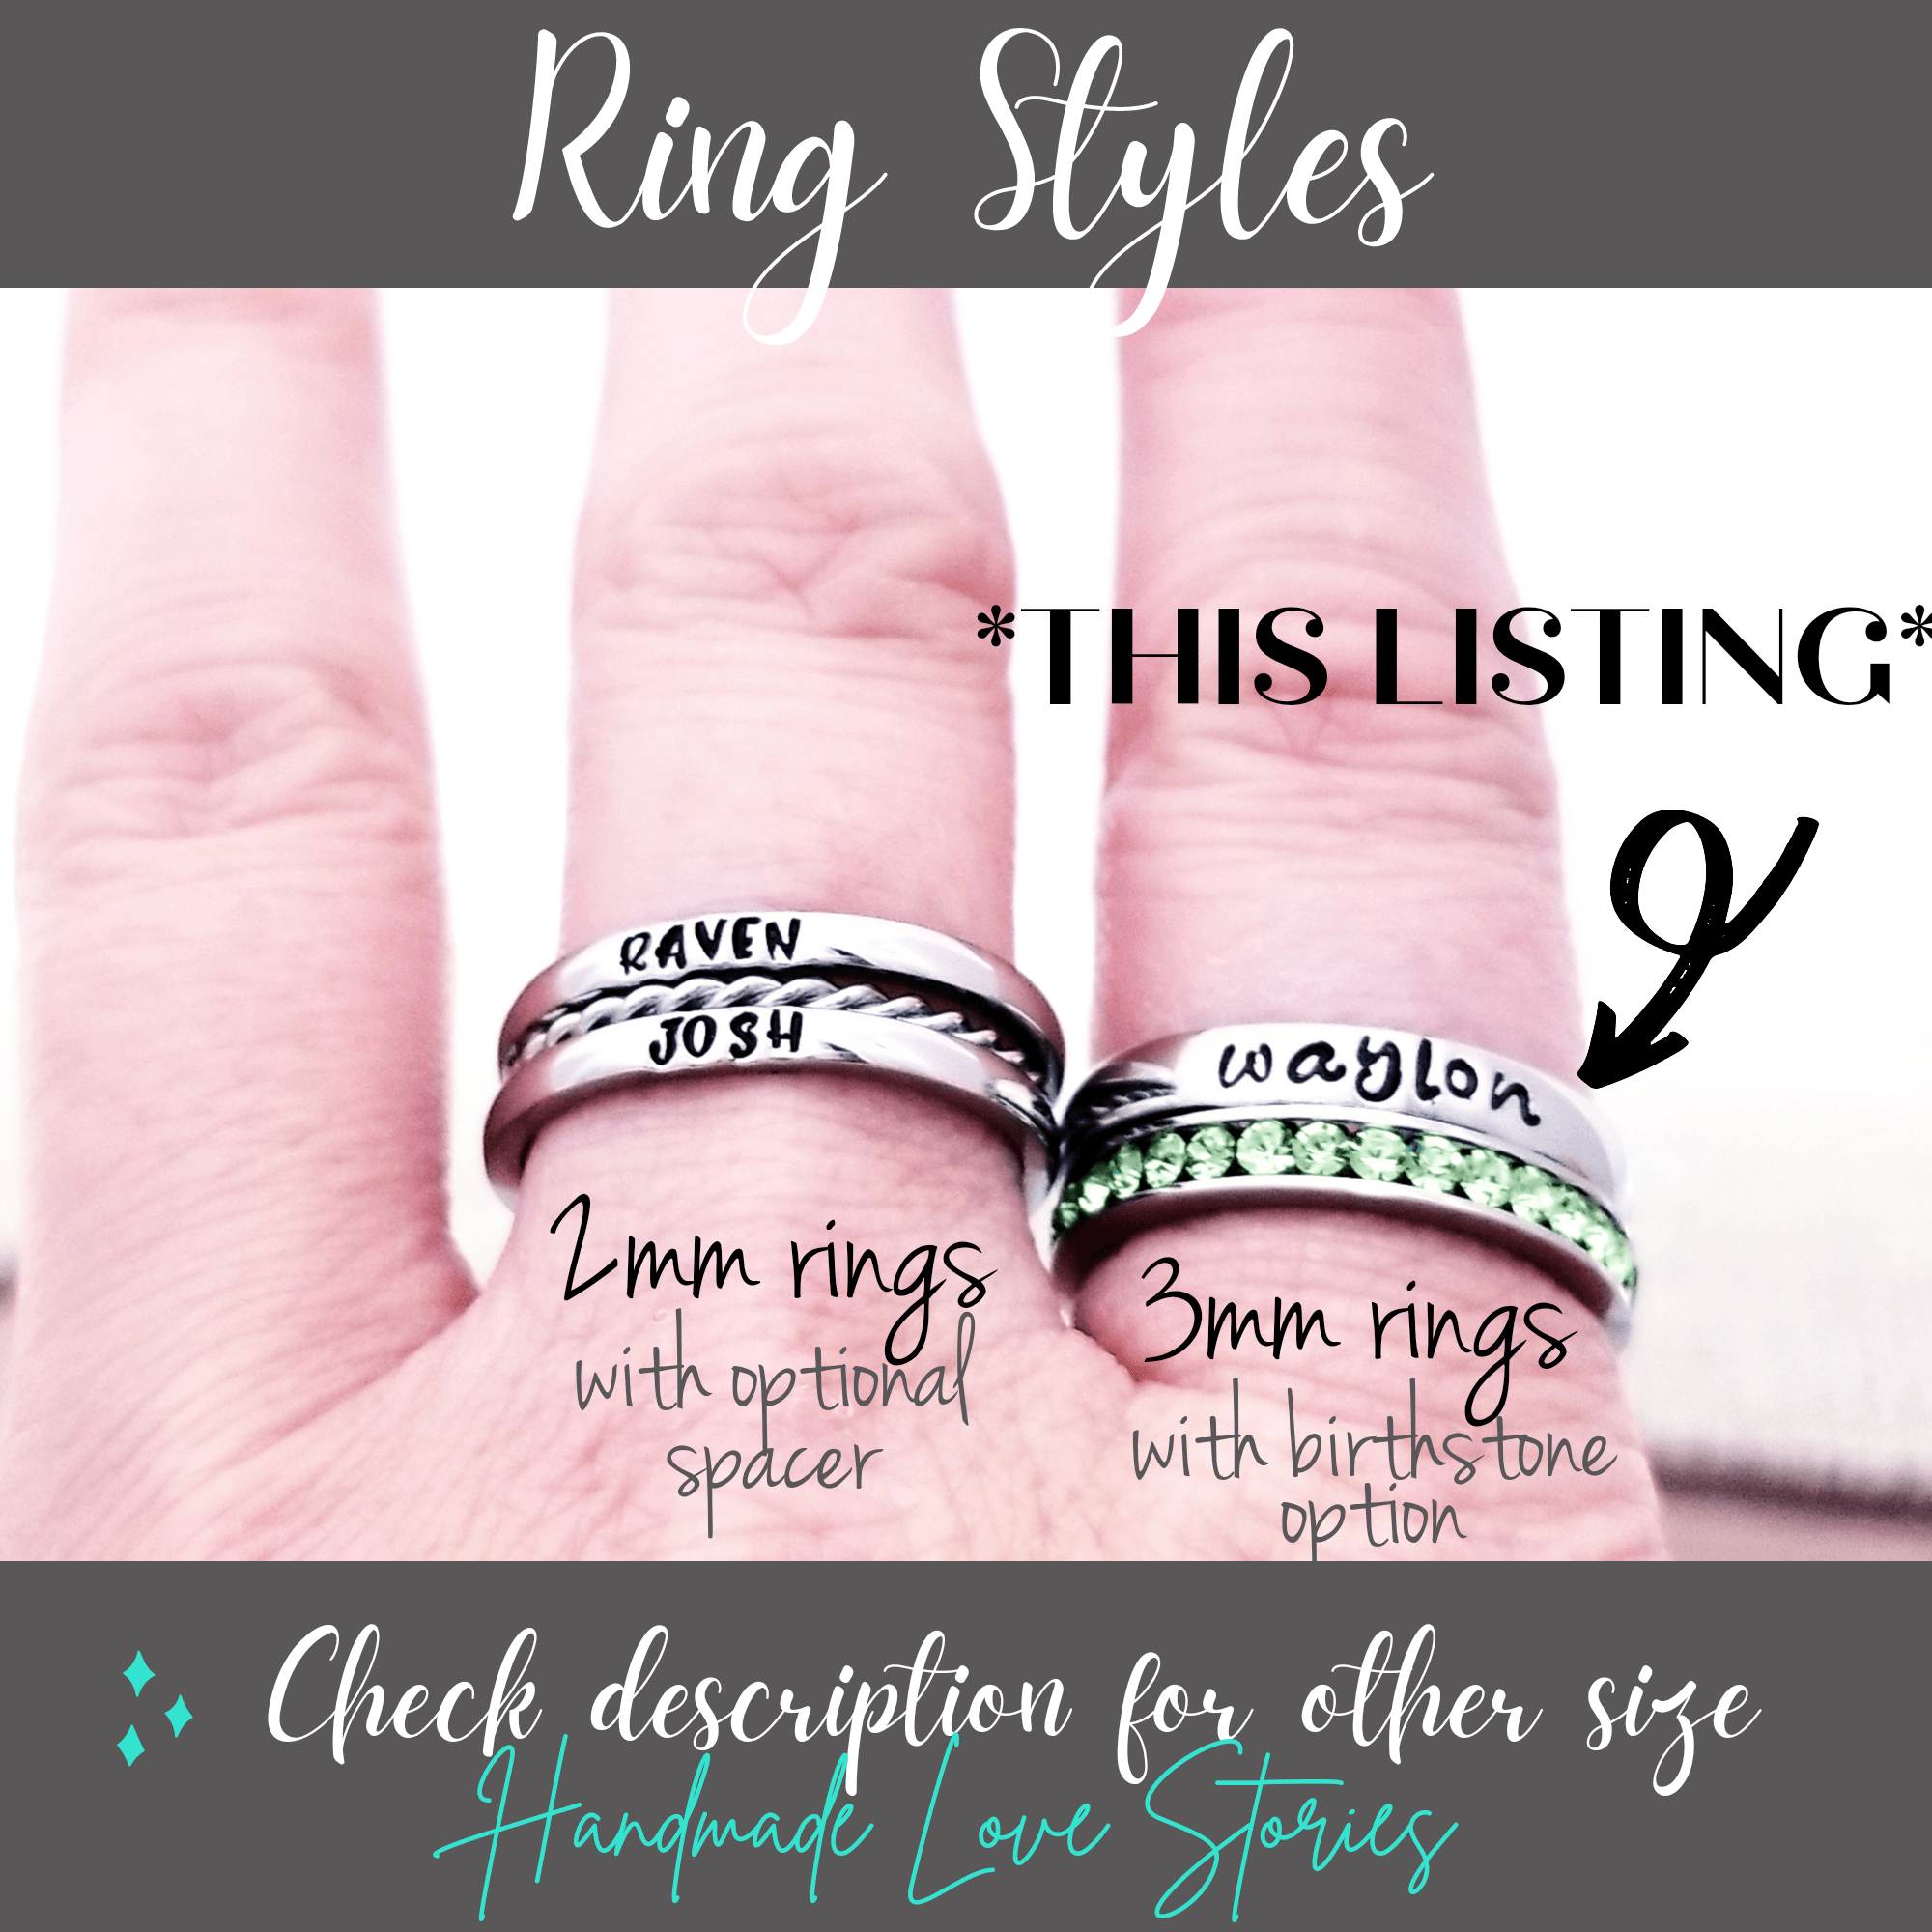 Memorial Stacking Ring, Memorial jewelry, Personalize Jewelry, Hand Stamped Name Ring, Silver Personalize Ring, Stackable Name Rings, Custom Rings